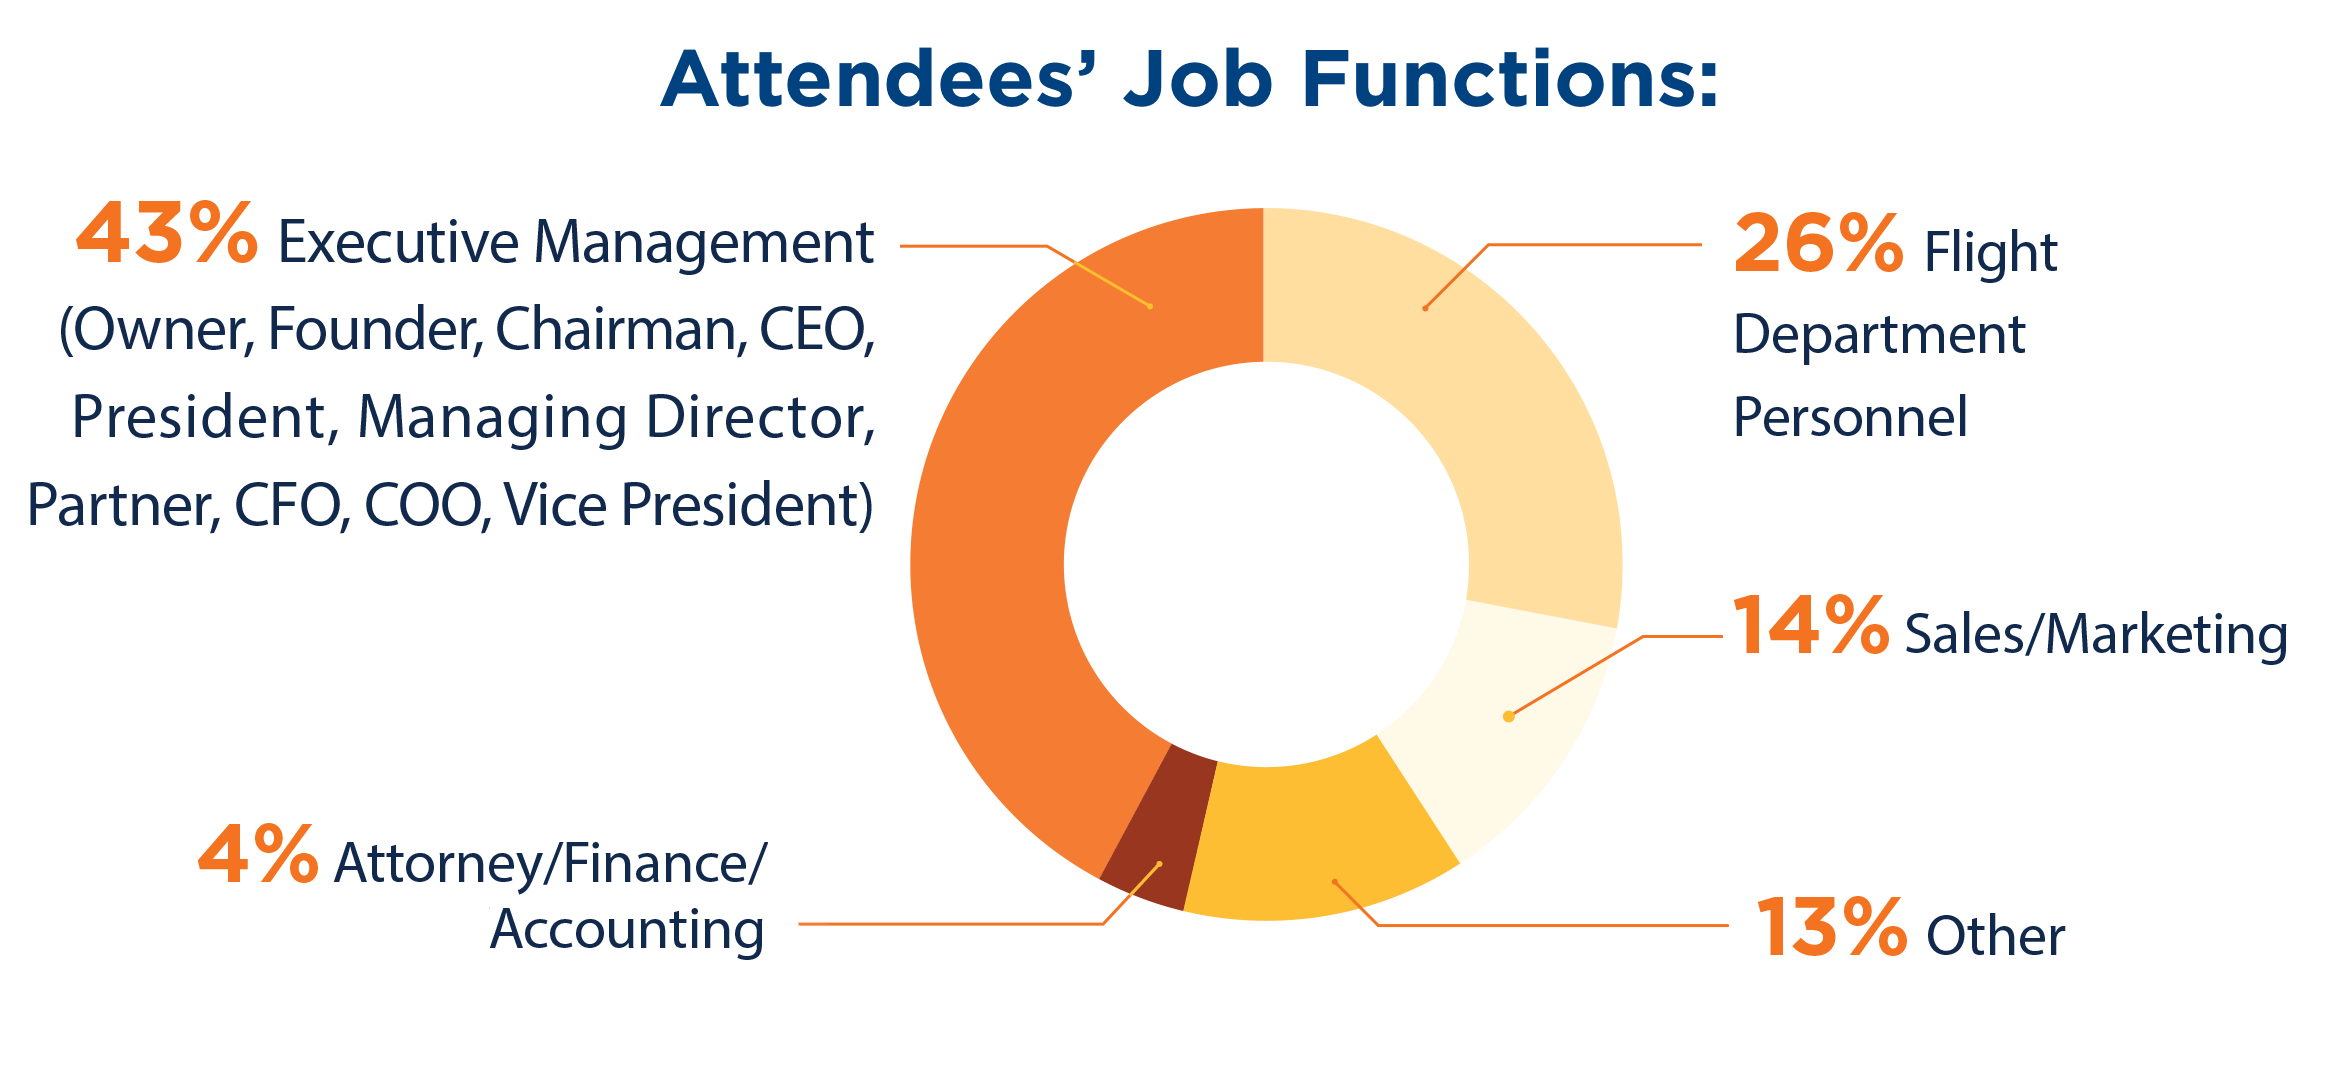 Attendee Job Functions